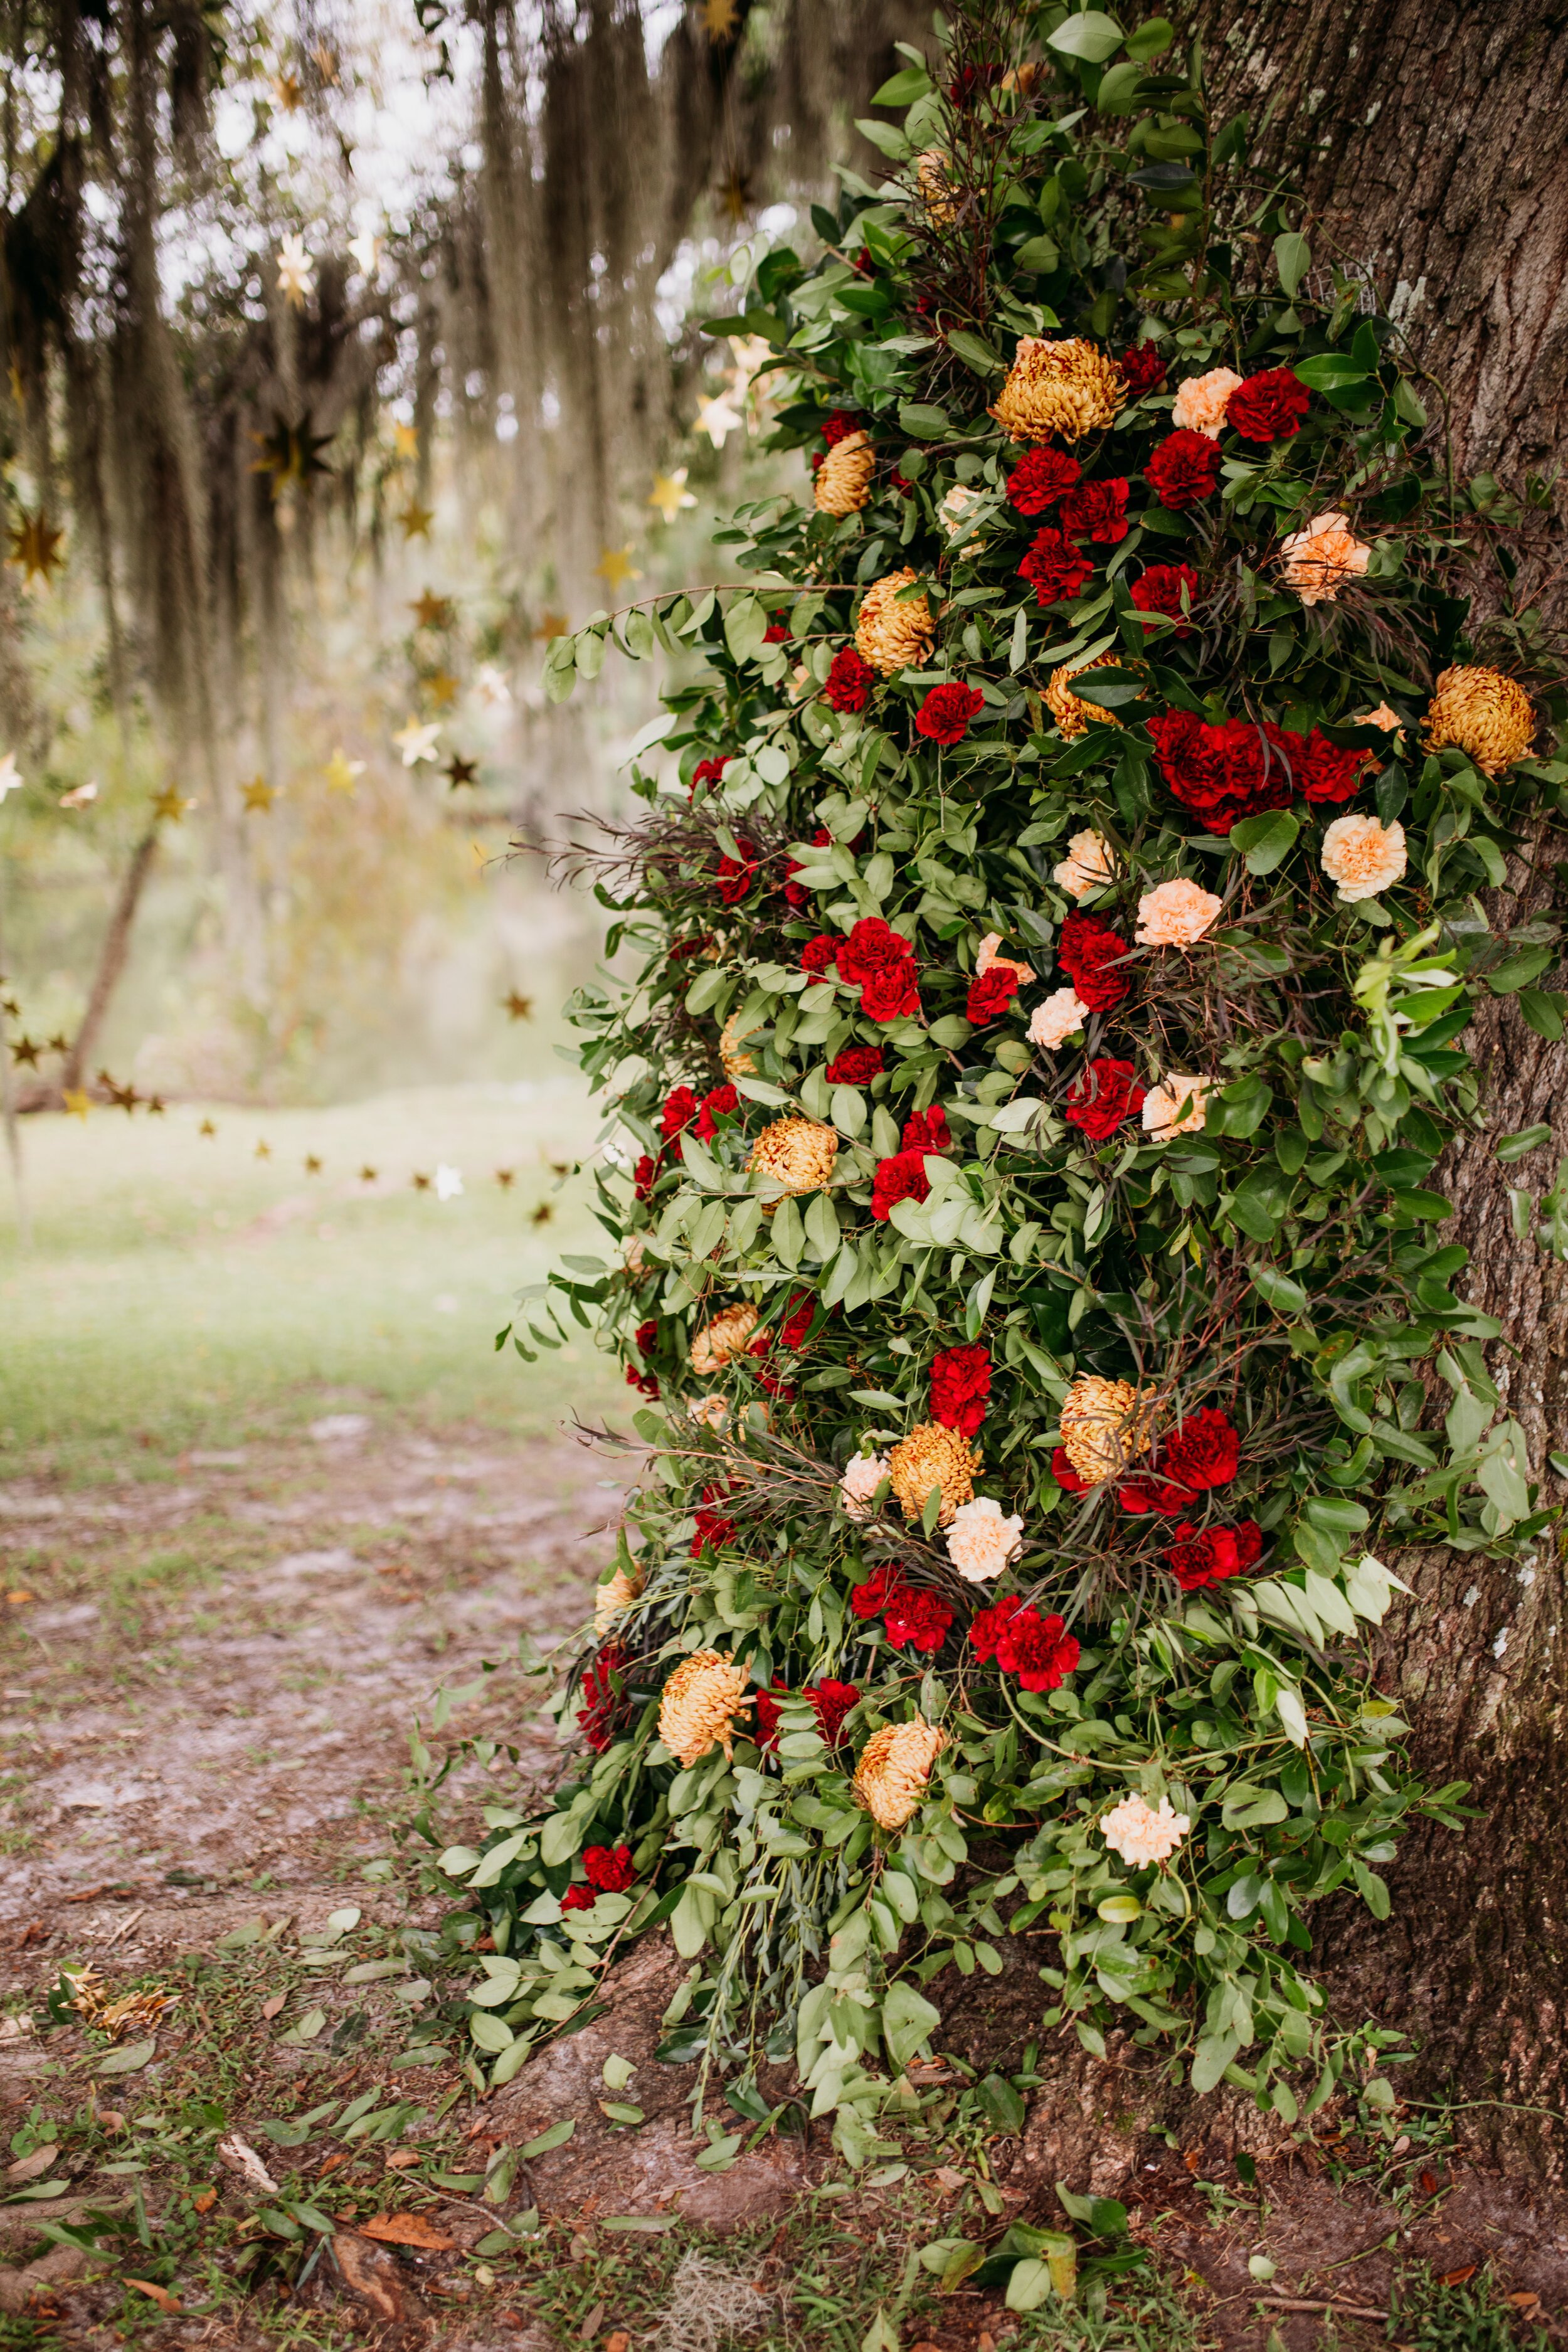 ivory-and-beau-florals-alex-and-david-red-gate-farms-wedding-flowers-wedding-florals-savannah-wedding-savannah-florist-wedding-florist-colorful-rich-bold-inspiration-flowers-Bowles36.jpg